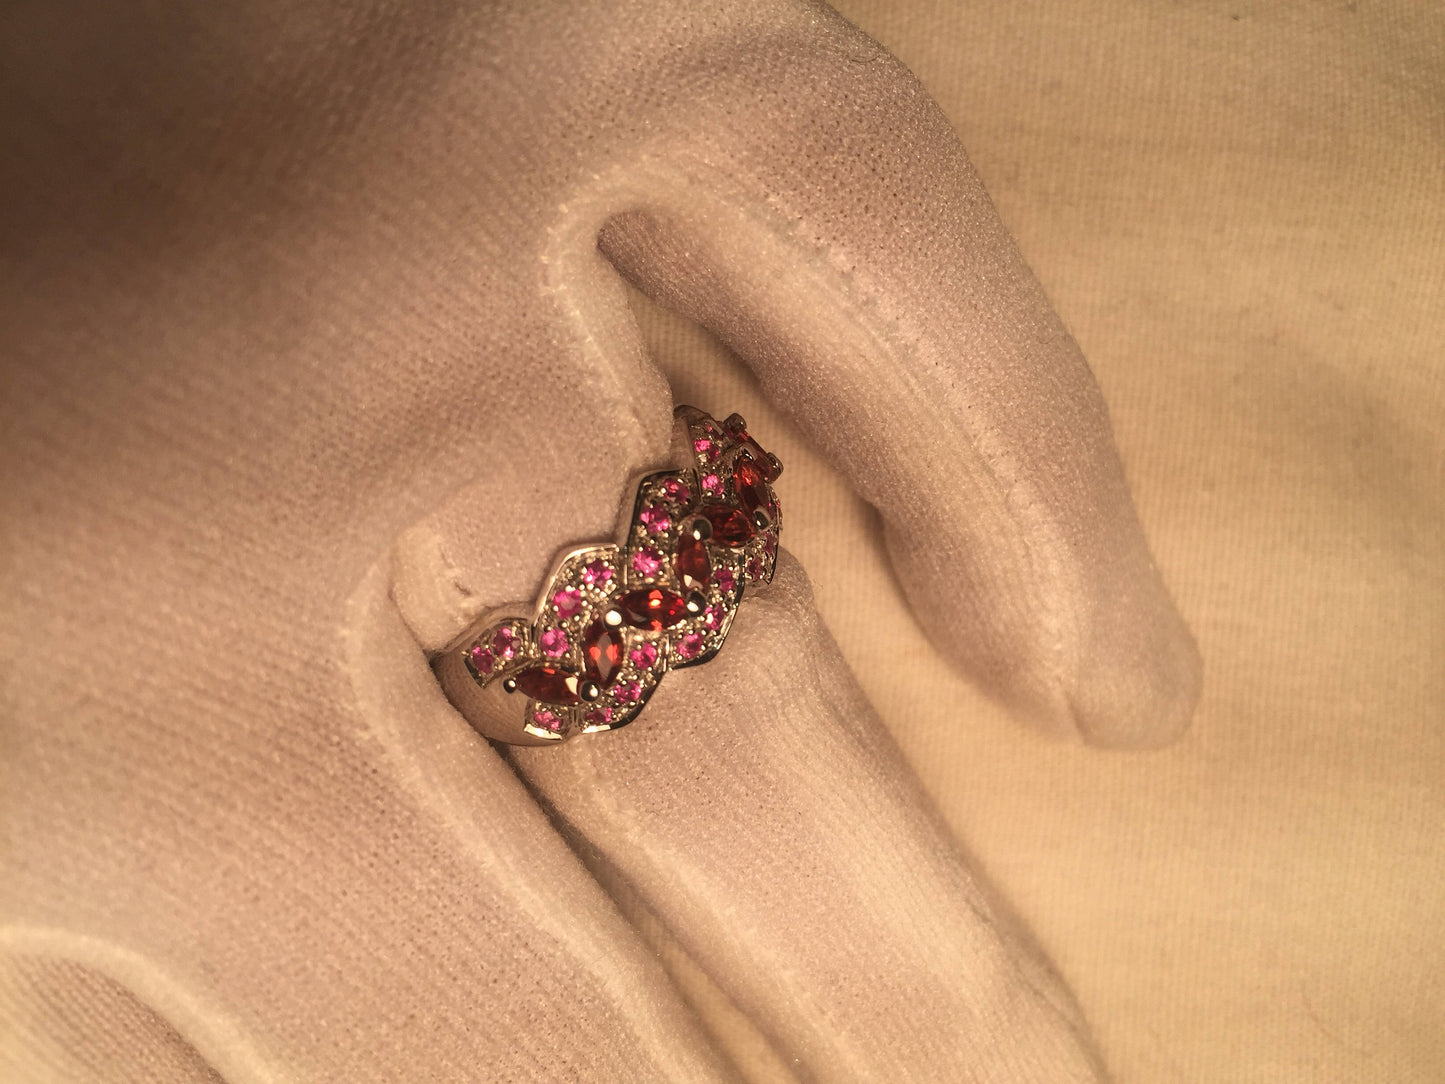 Vintage Handmade Pink Ruby and Garnet 925 Sterling Silver Gothic Ring